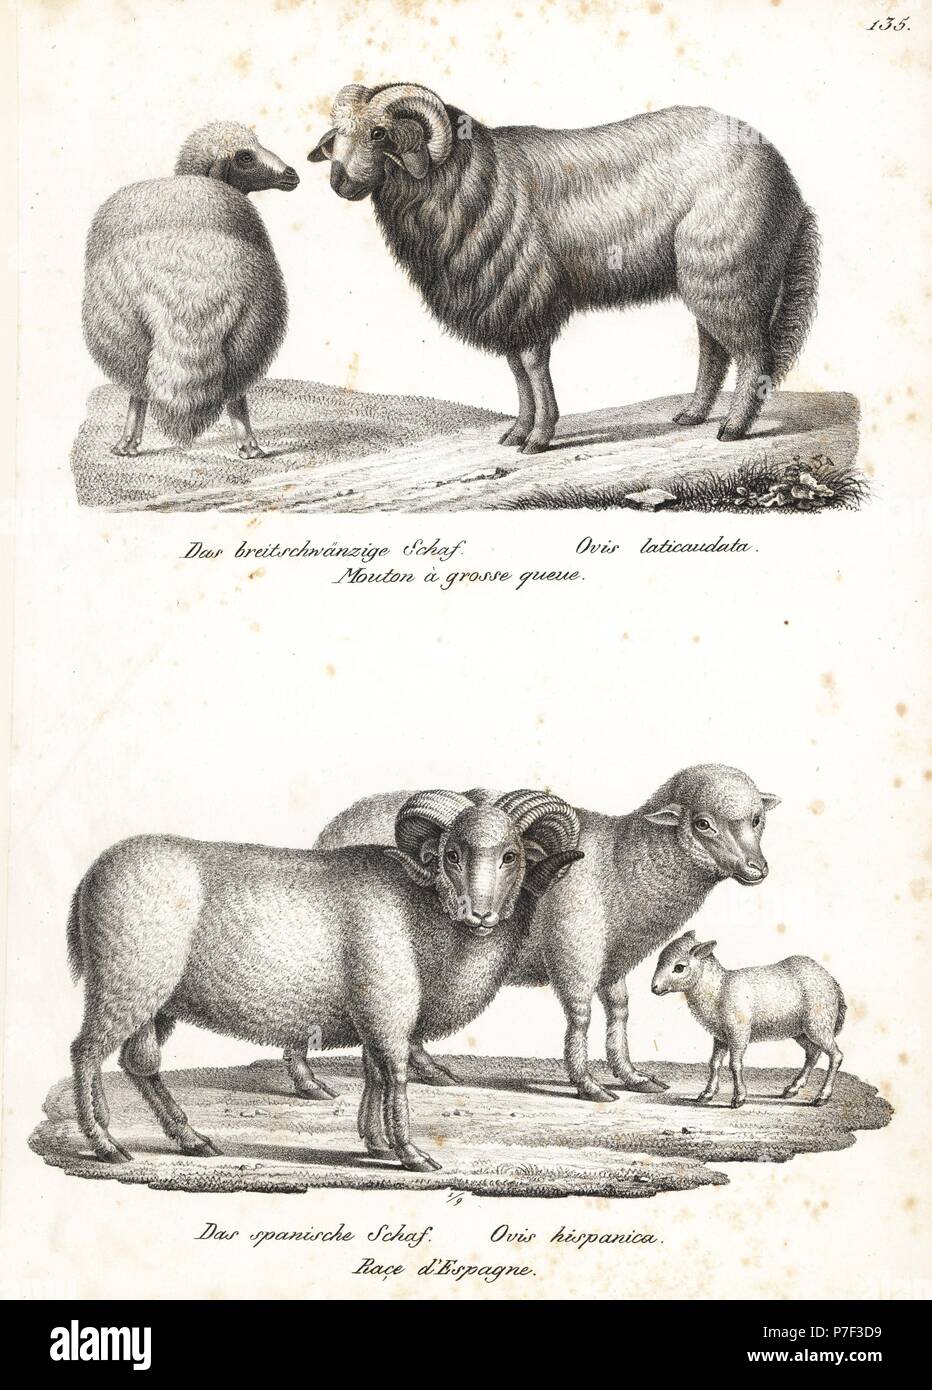 Broad-tailed sheep, Ovis aries laticaudata, and merino sheep, Ovis aries hispanica. Lithograph by Karl Joseph Brodtmann from Heinrich Rudolf Schinz's Illustrated Natural History of Men and Animals, 1836. Stock Photo